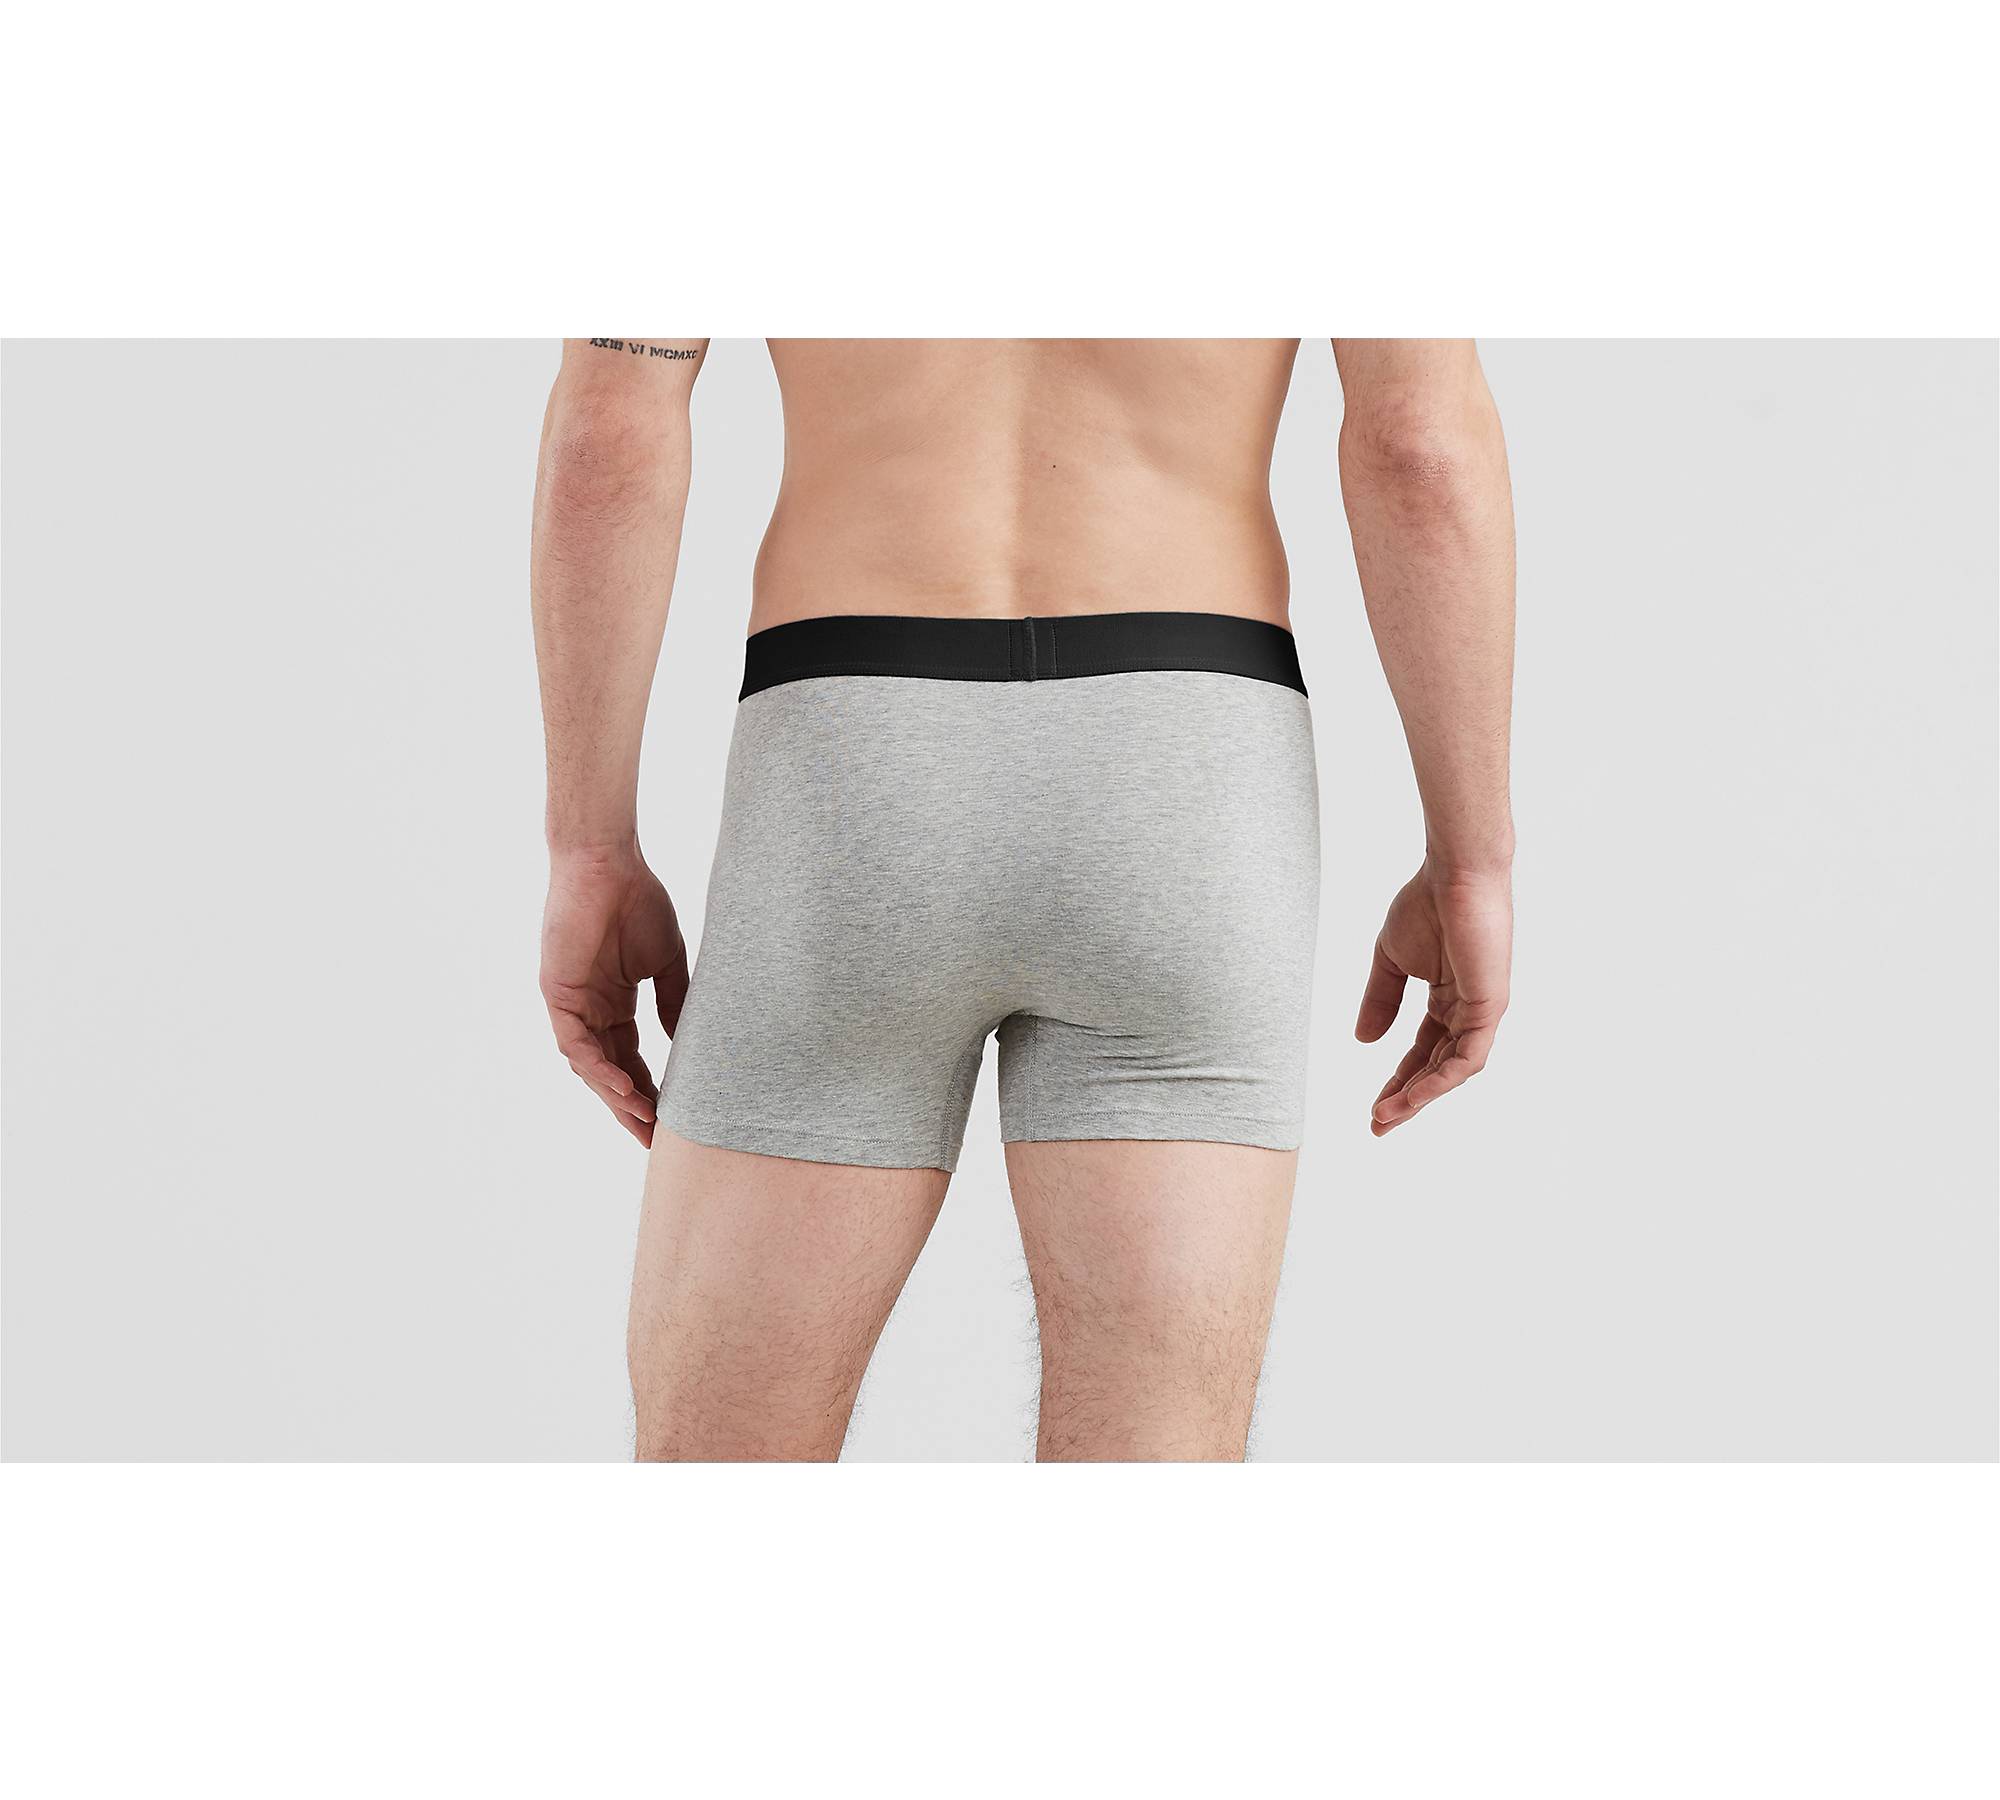 French Crocodile Boxer Mens Seamless Underwear For Men Available From  Yefeng2, $5.15